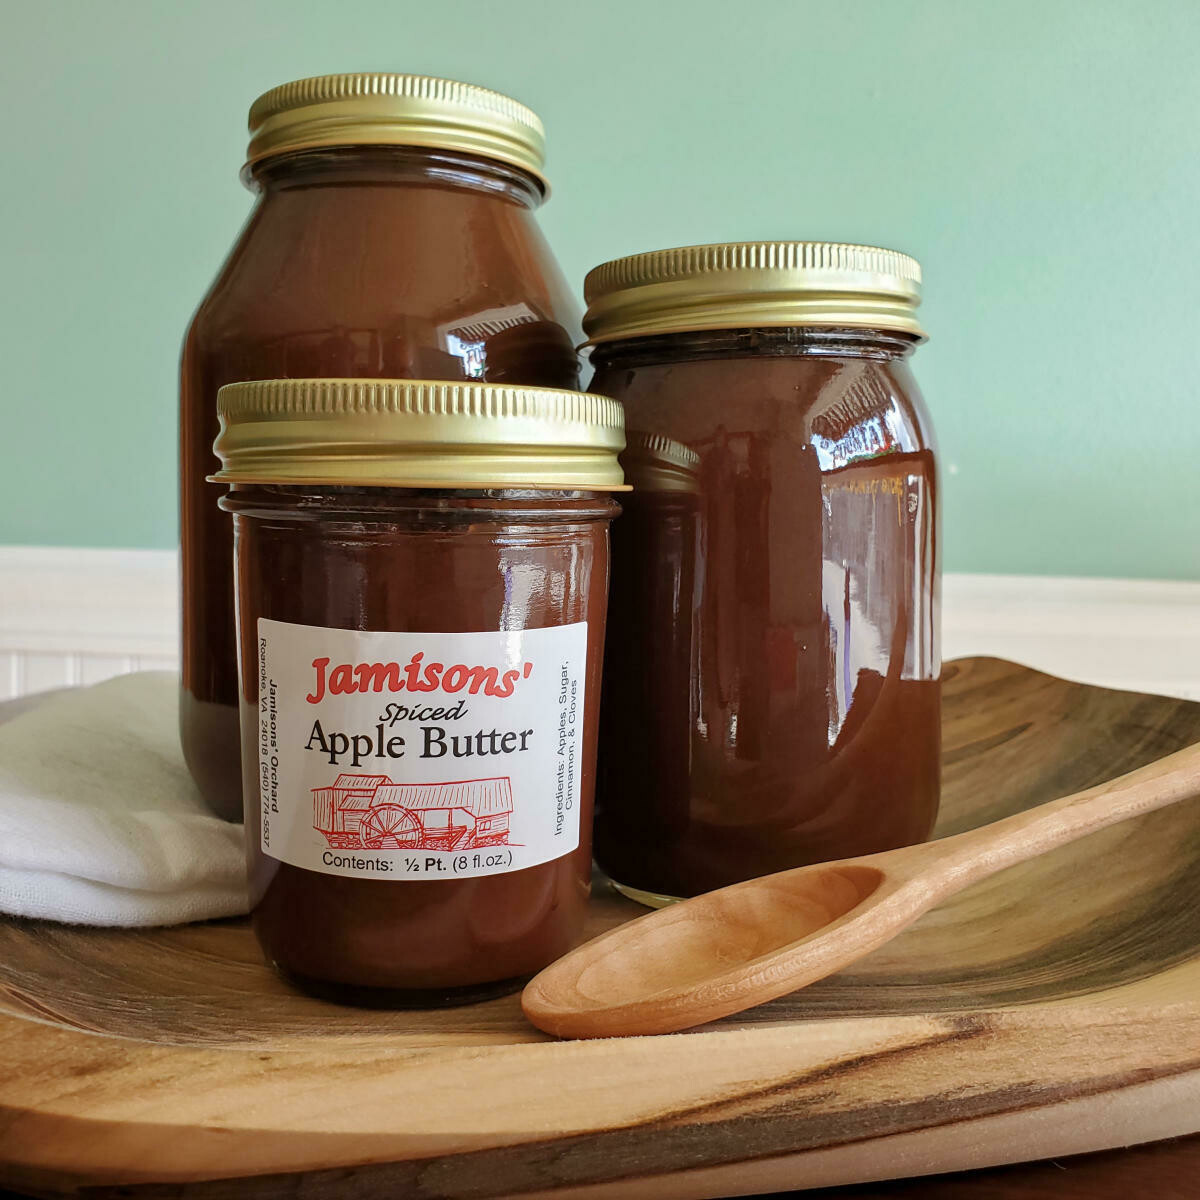 Jamisons' Homemade Spiced Apple Butter